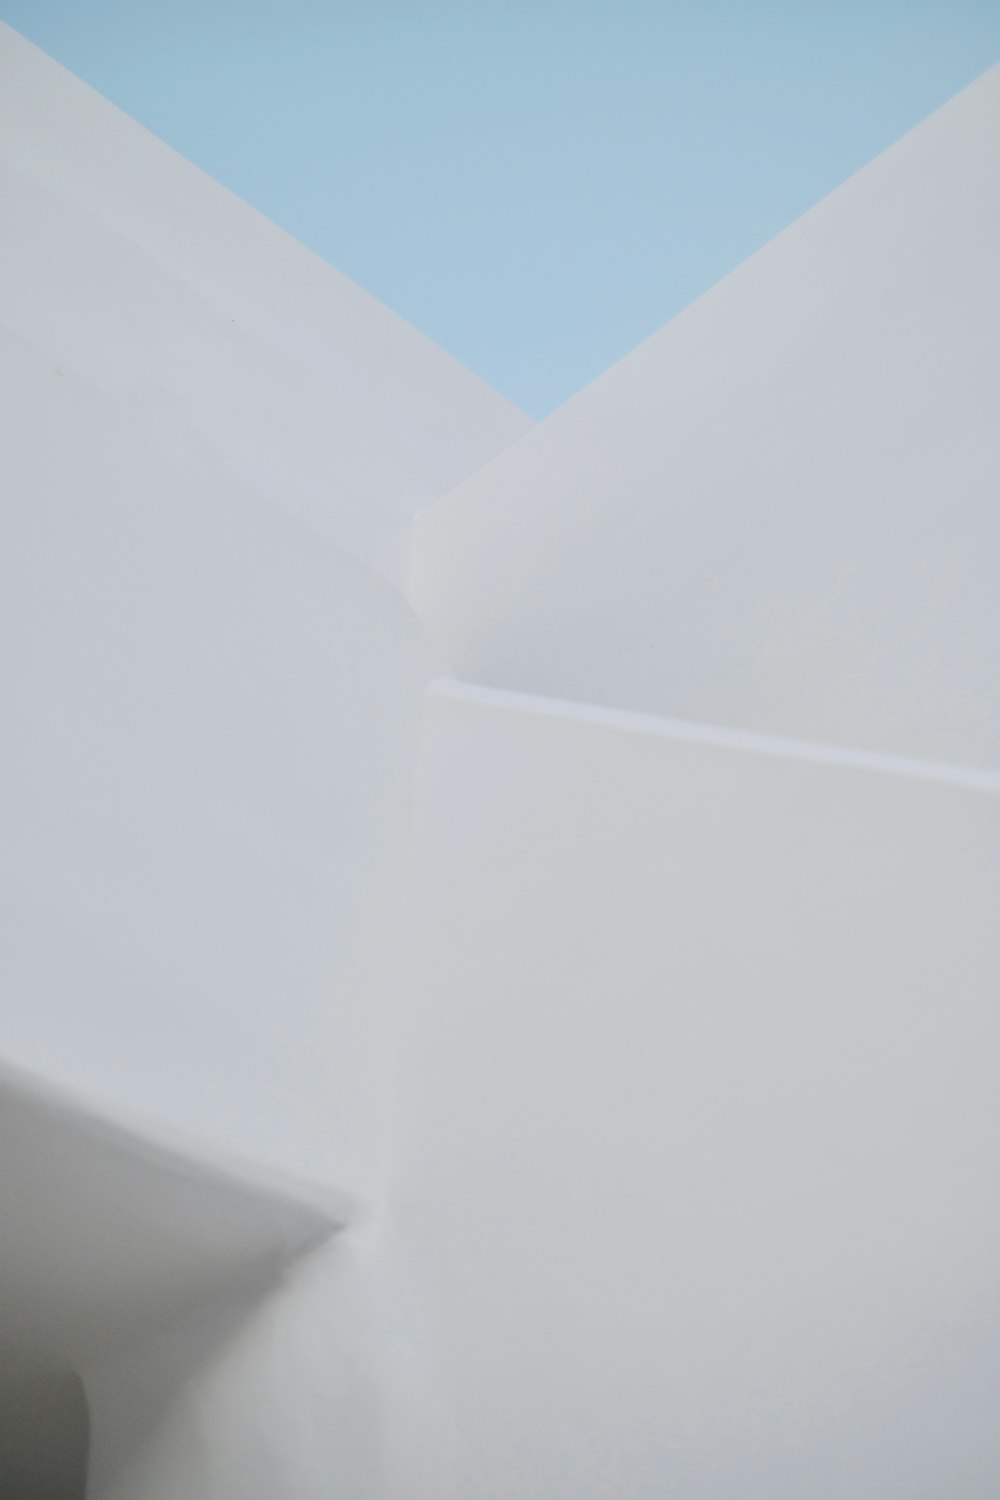 a white ceiling with a blue sky